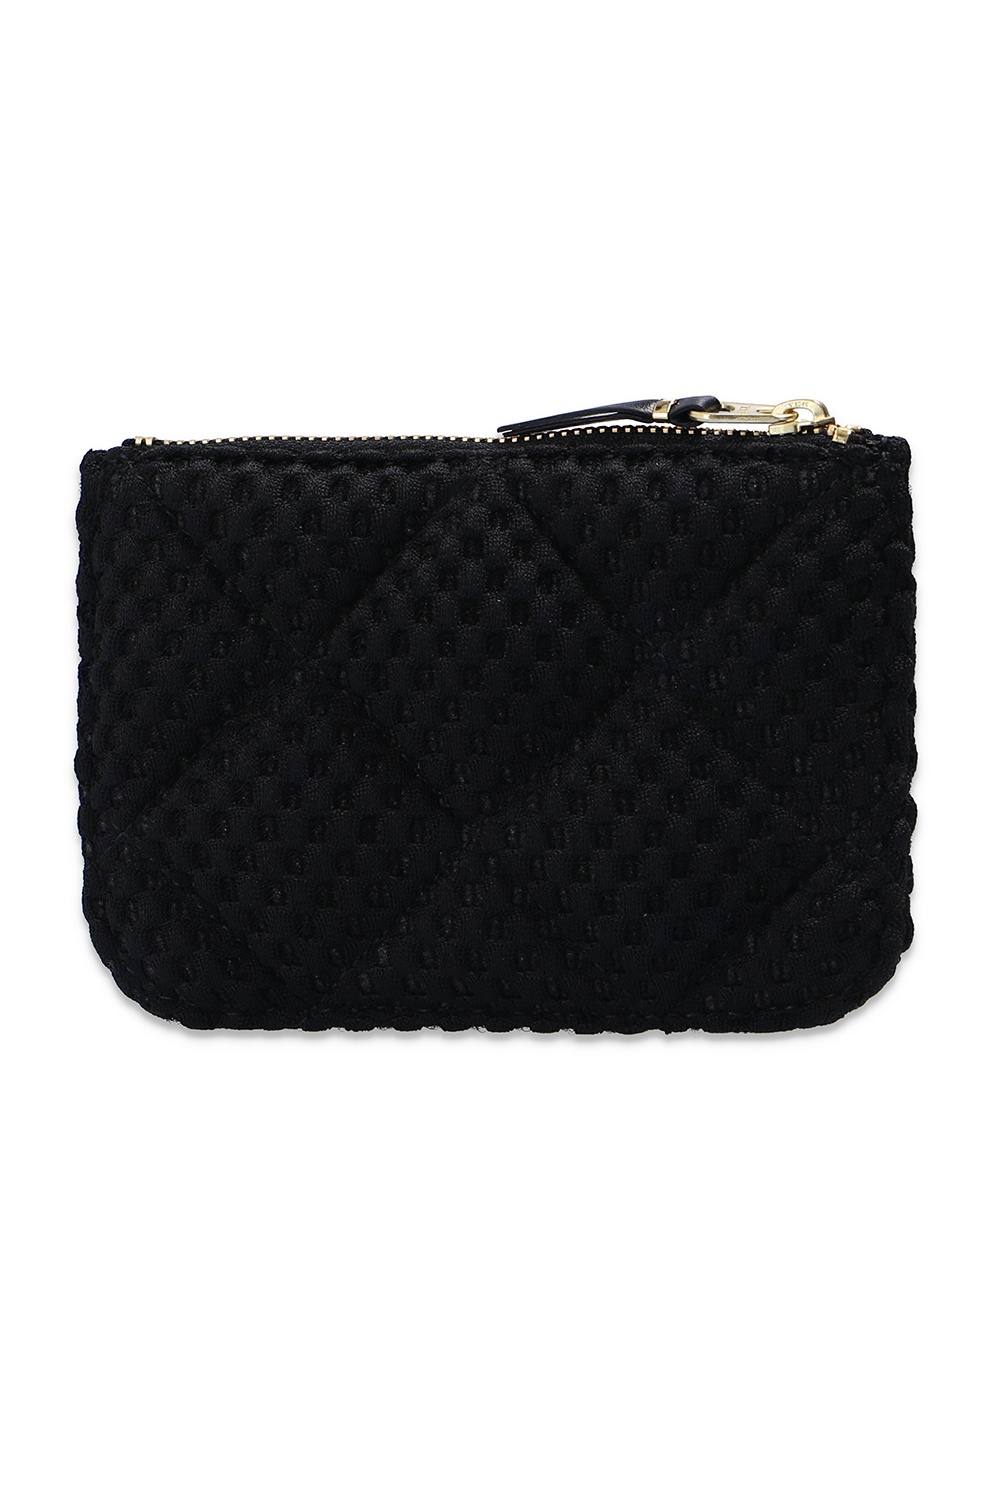 Comme des Garcons Quilted pouch